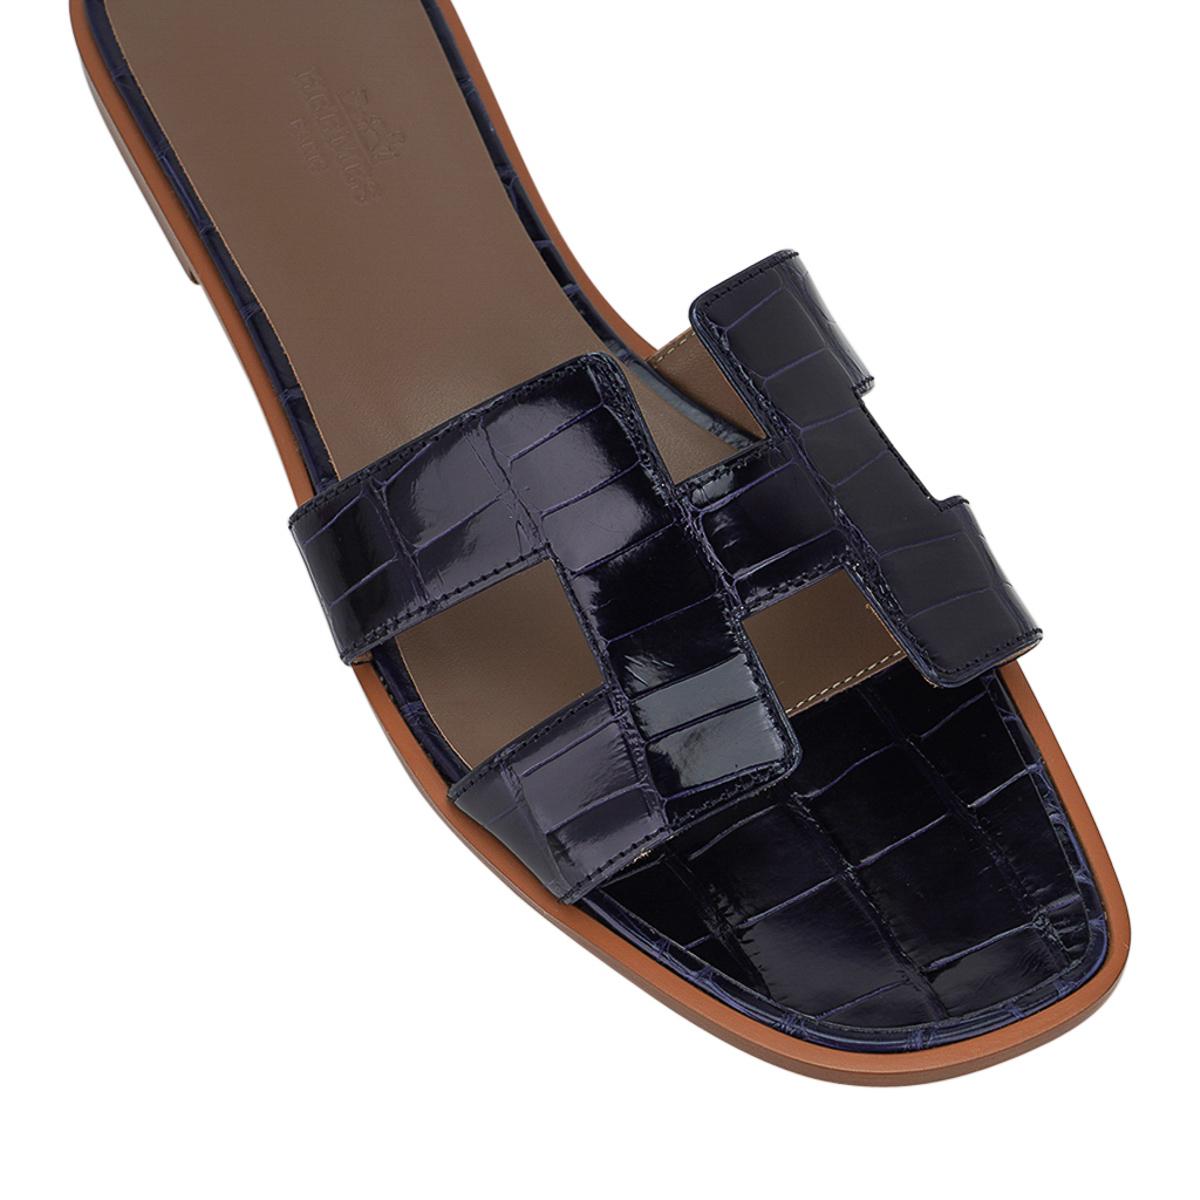 Mightychic offers a pair of Hermes Oran sandals featured in Bleu Marine Alligator.
This stunning limited edition Hermes Oran flat slide sandal is a neutral with a subtle punch of colour.
The iconic H cutout over the top of the foot.
Embossed